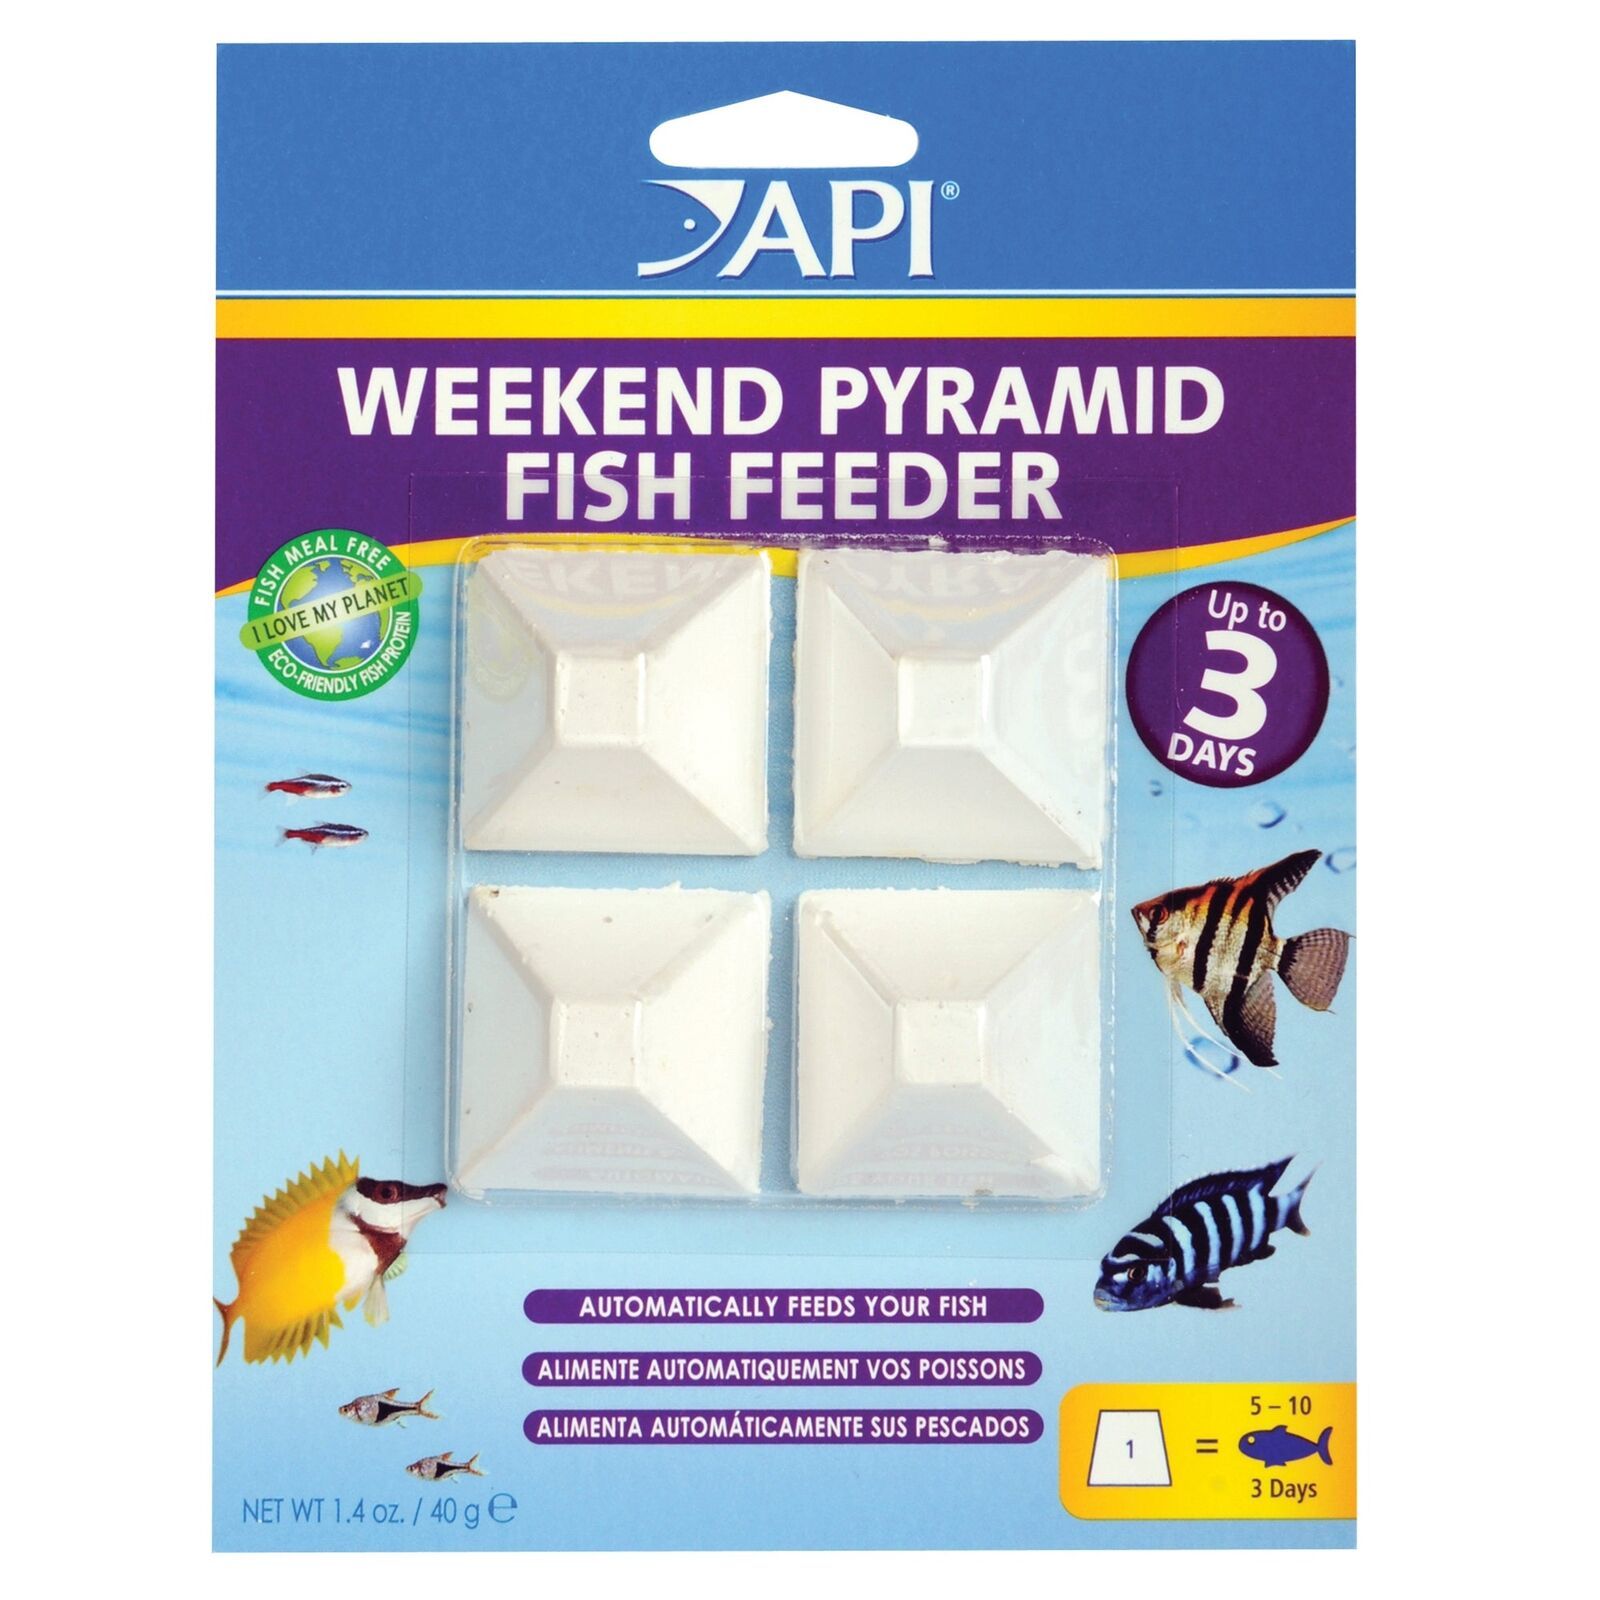 Primary image for API 3-Day Pyramid Fish Feeder - Slow-Release Nutritious Pellets for Weekend Feed